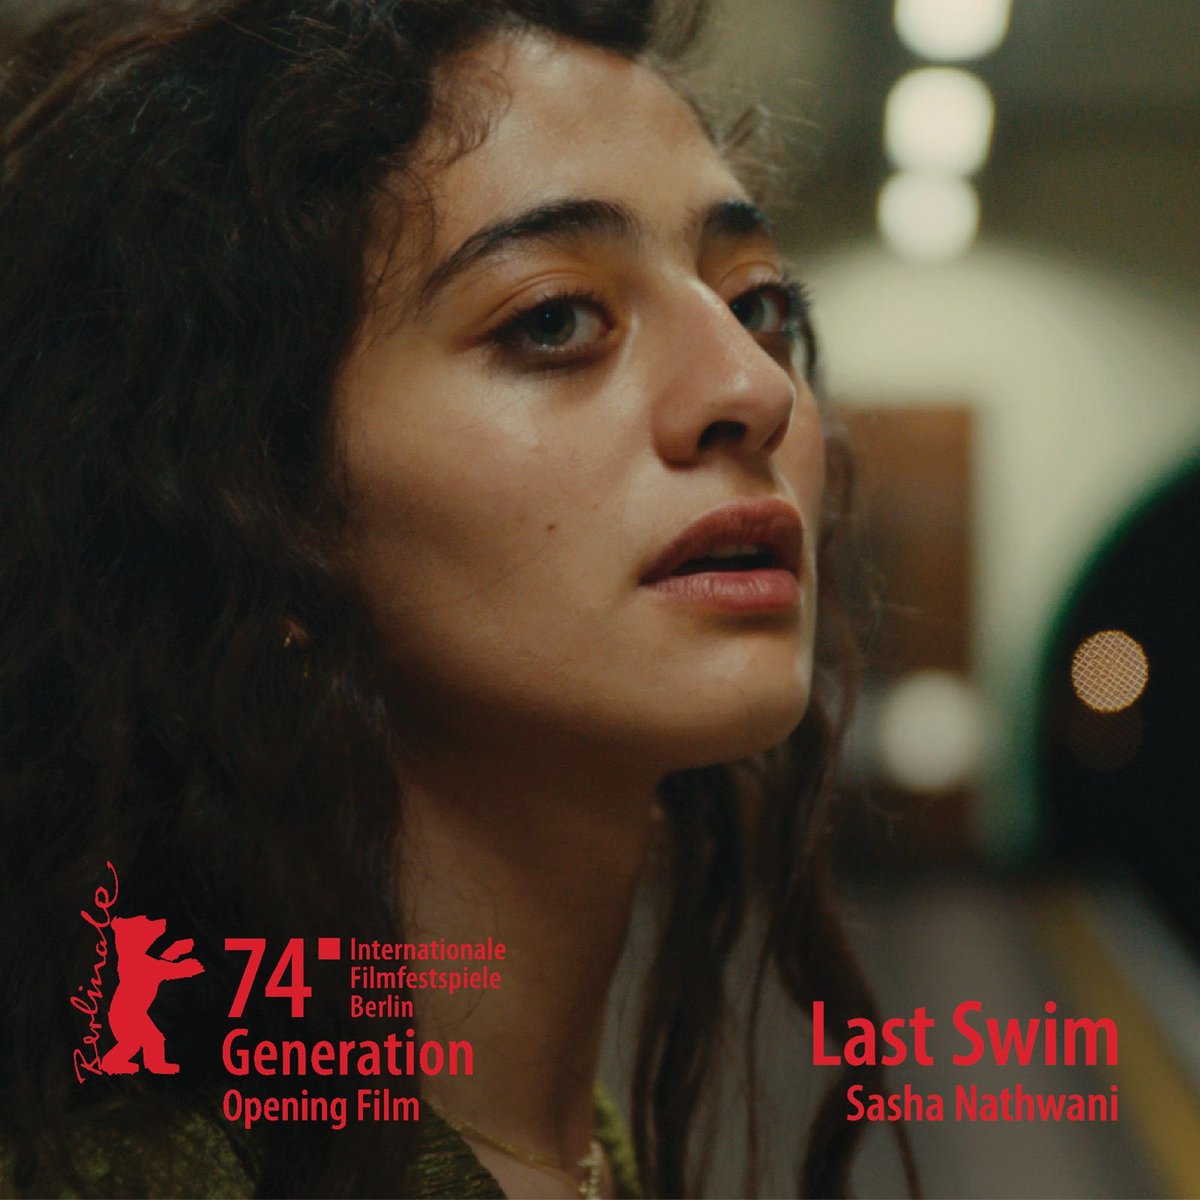 LAST SWIM is going to @berlinale !!! Big news for the cast and crew. See you in Berlin 🏆🎖️👑